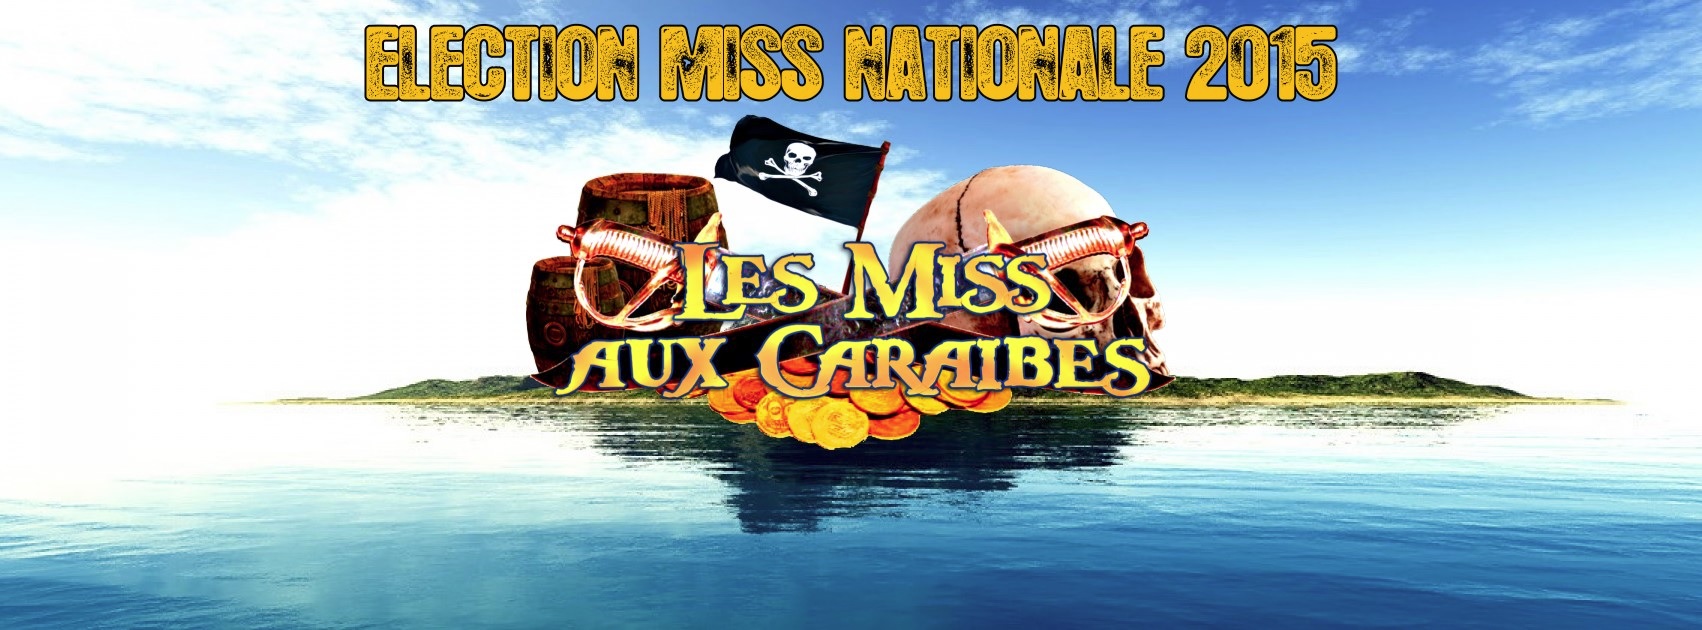 image miss nationale 2015